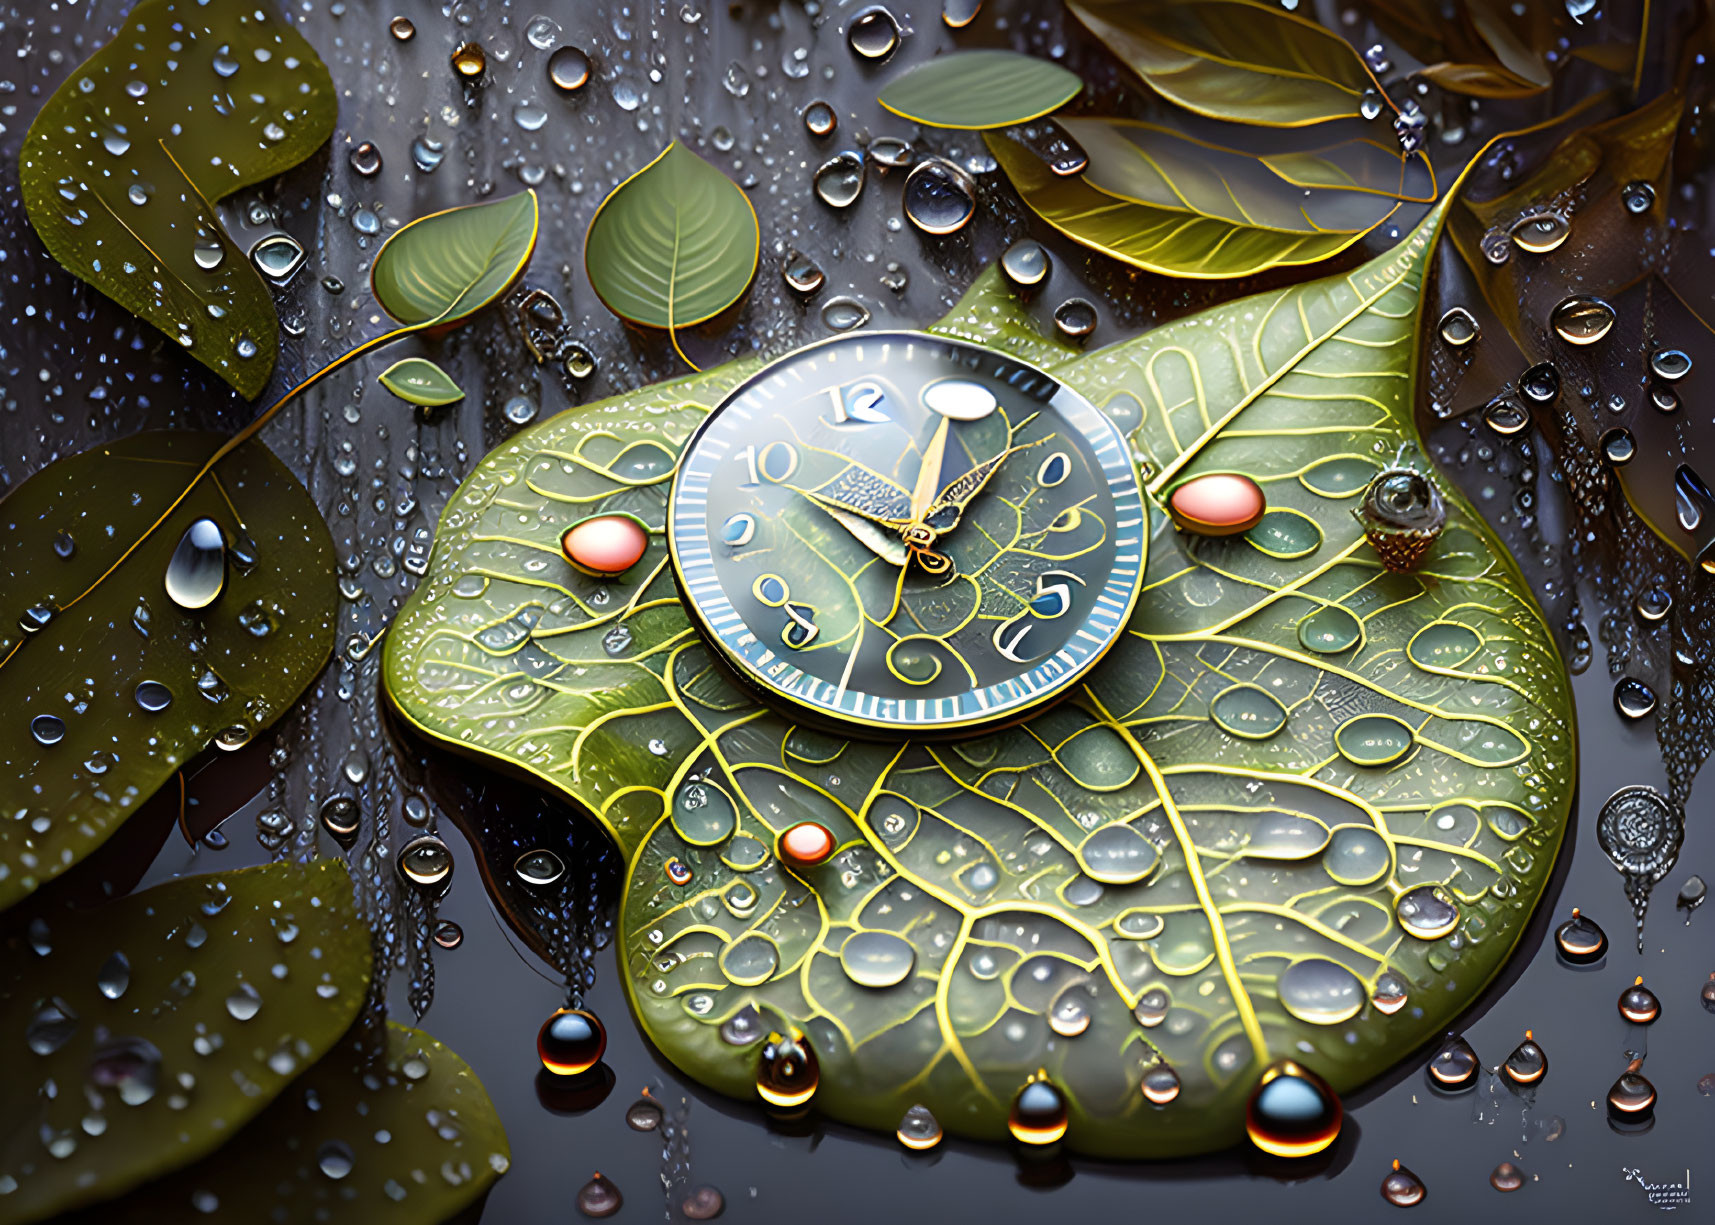 Intricately designed wristwatch on leaf with water droplets and golden reflections.